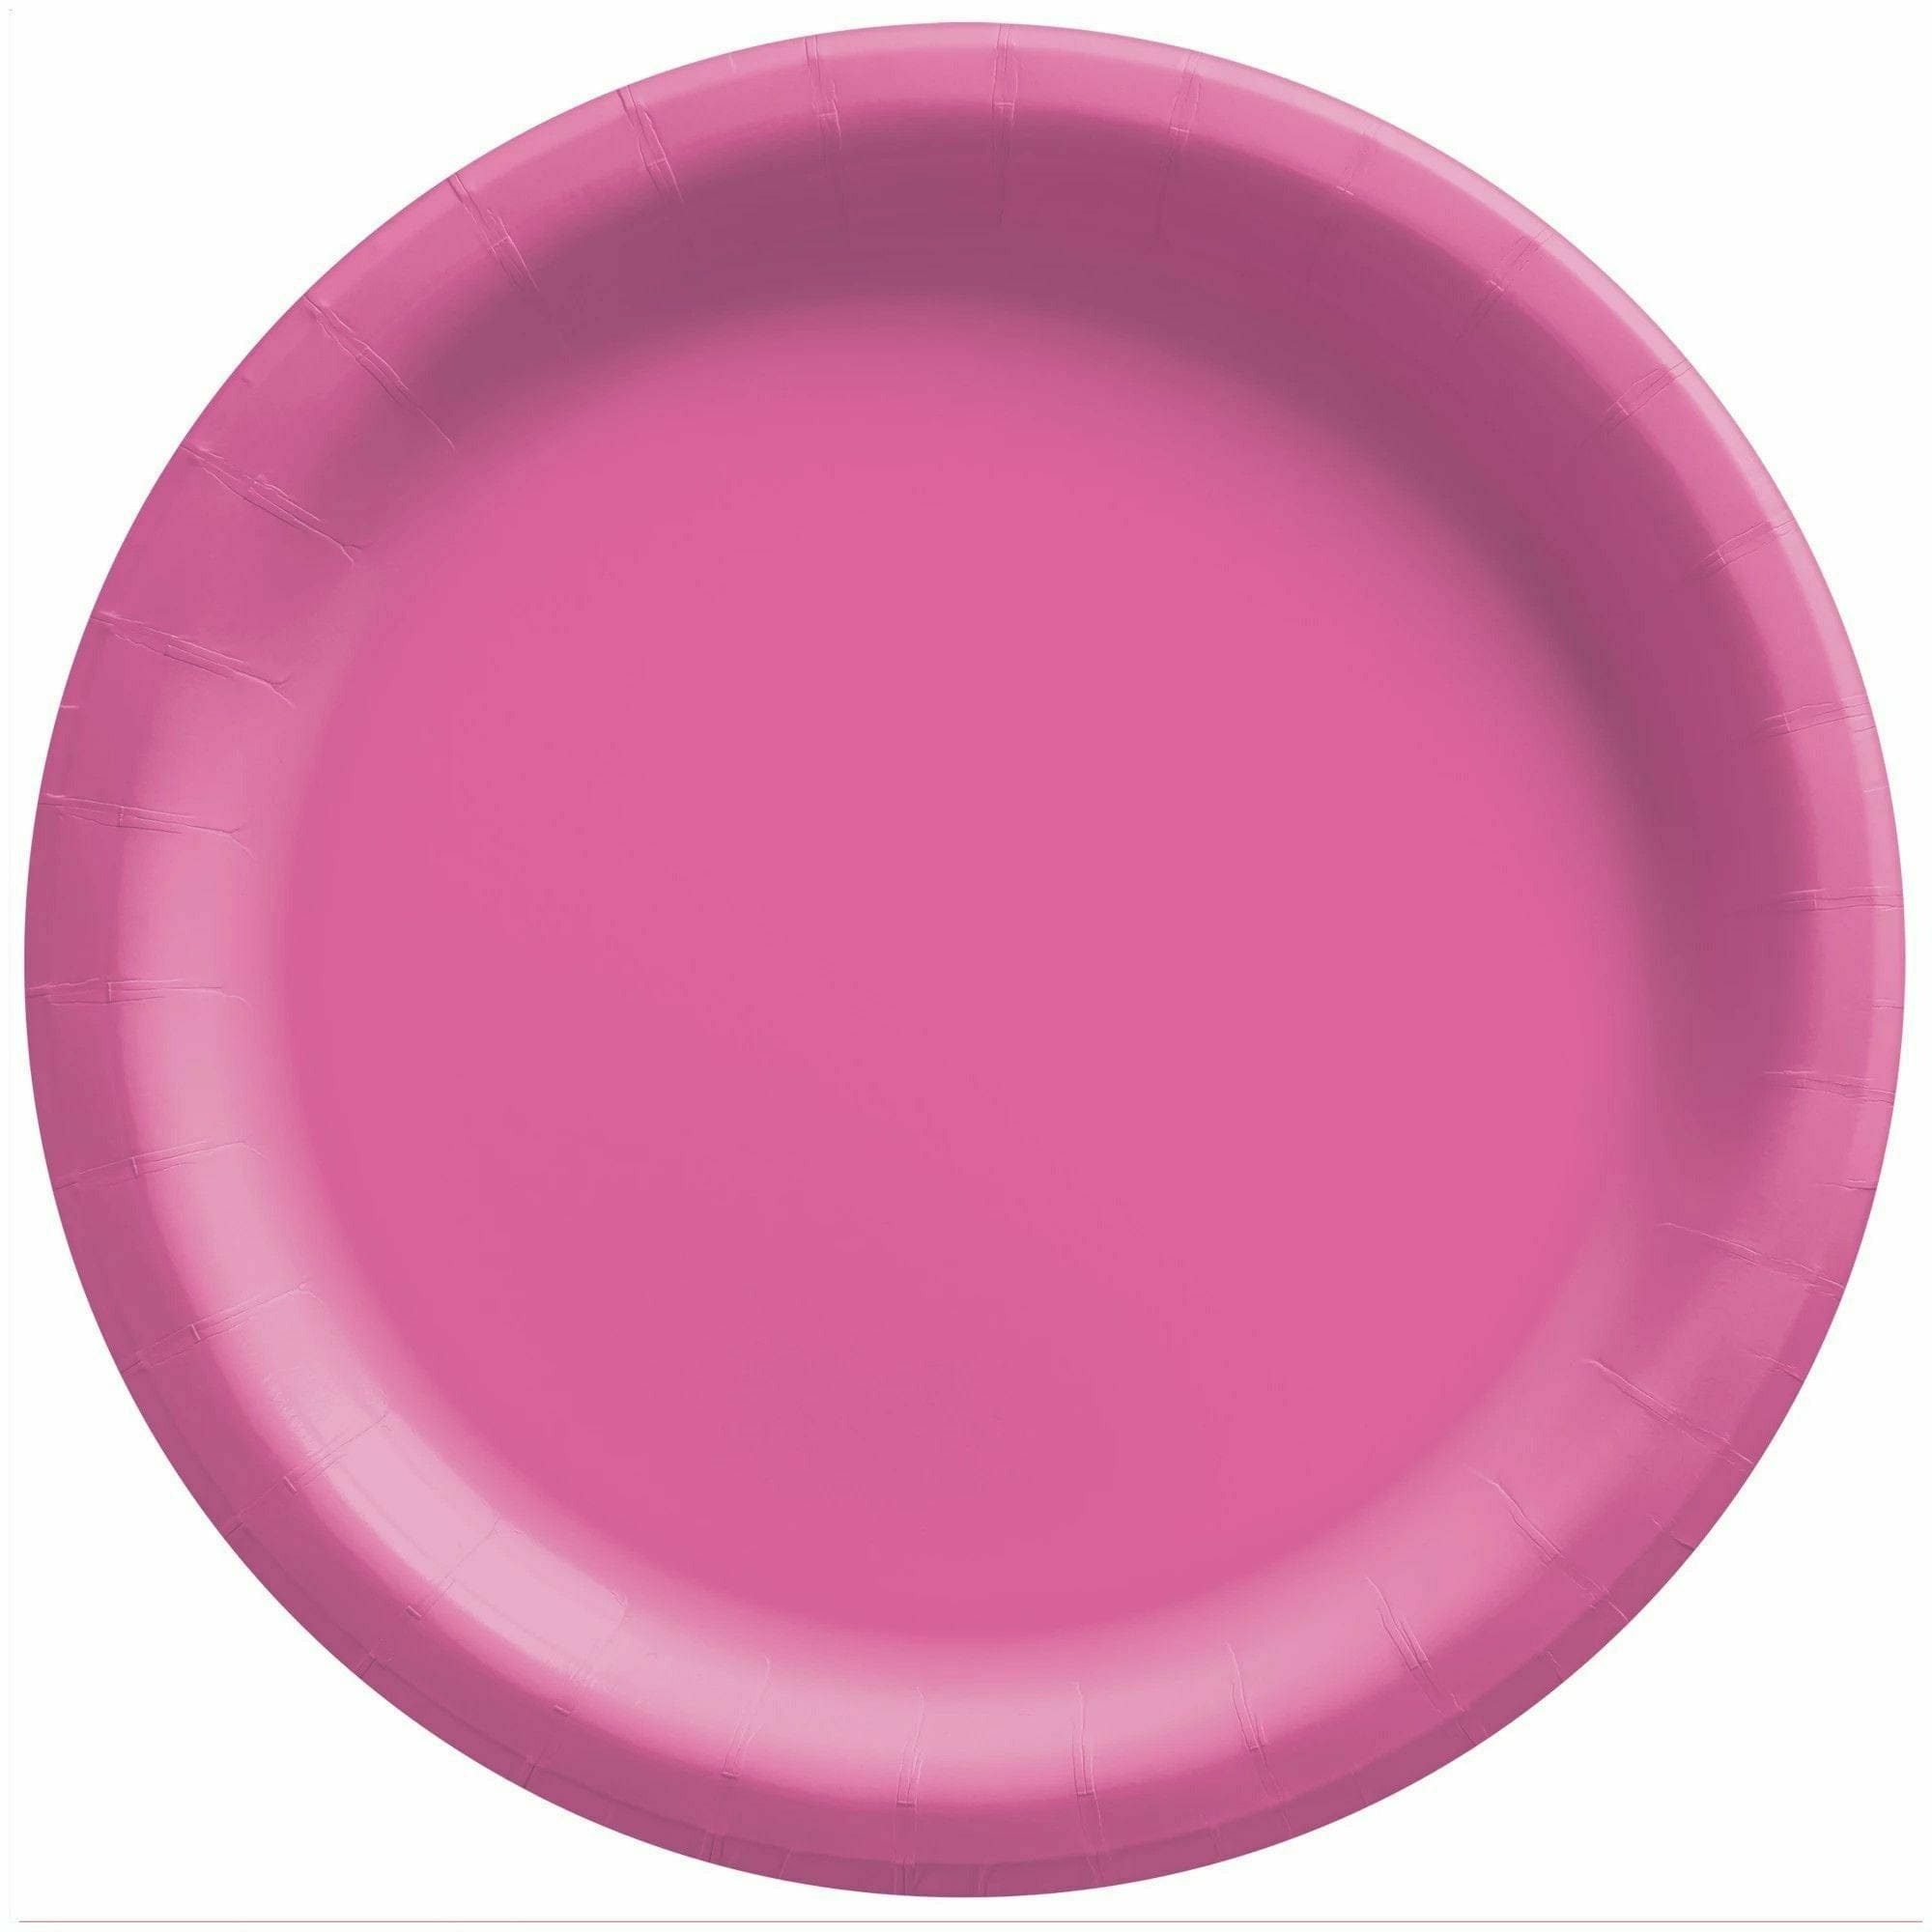 Amscan BASIC Bright Pink - 6 3/4" Round Paper Plates, 50 Ct.